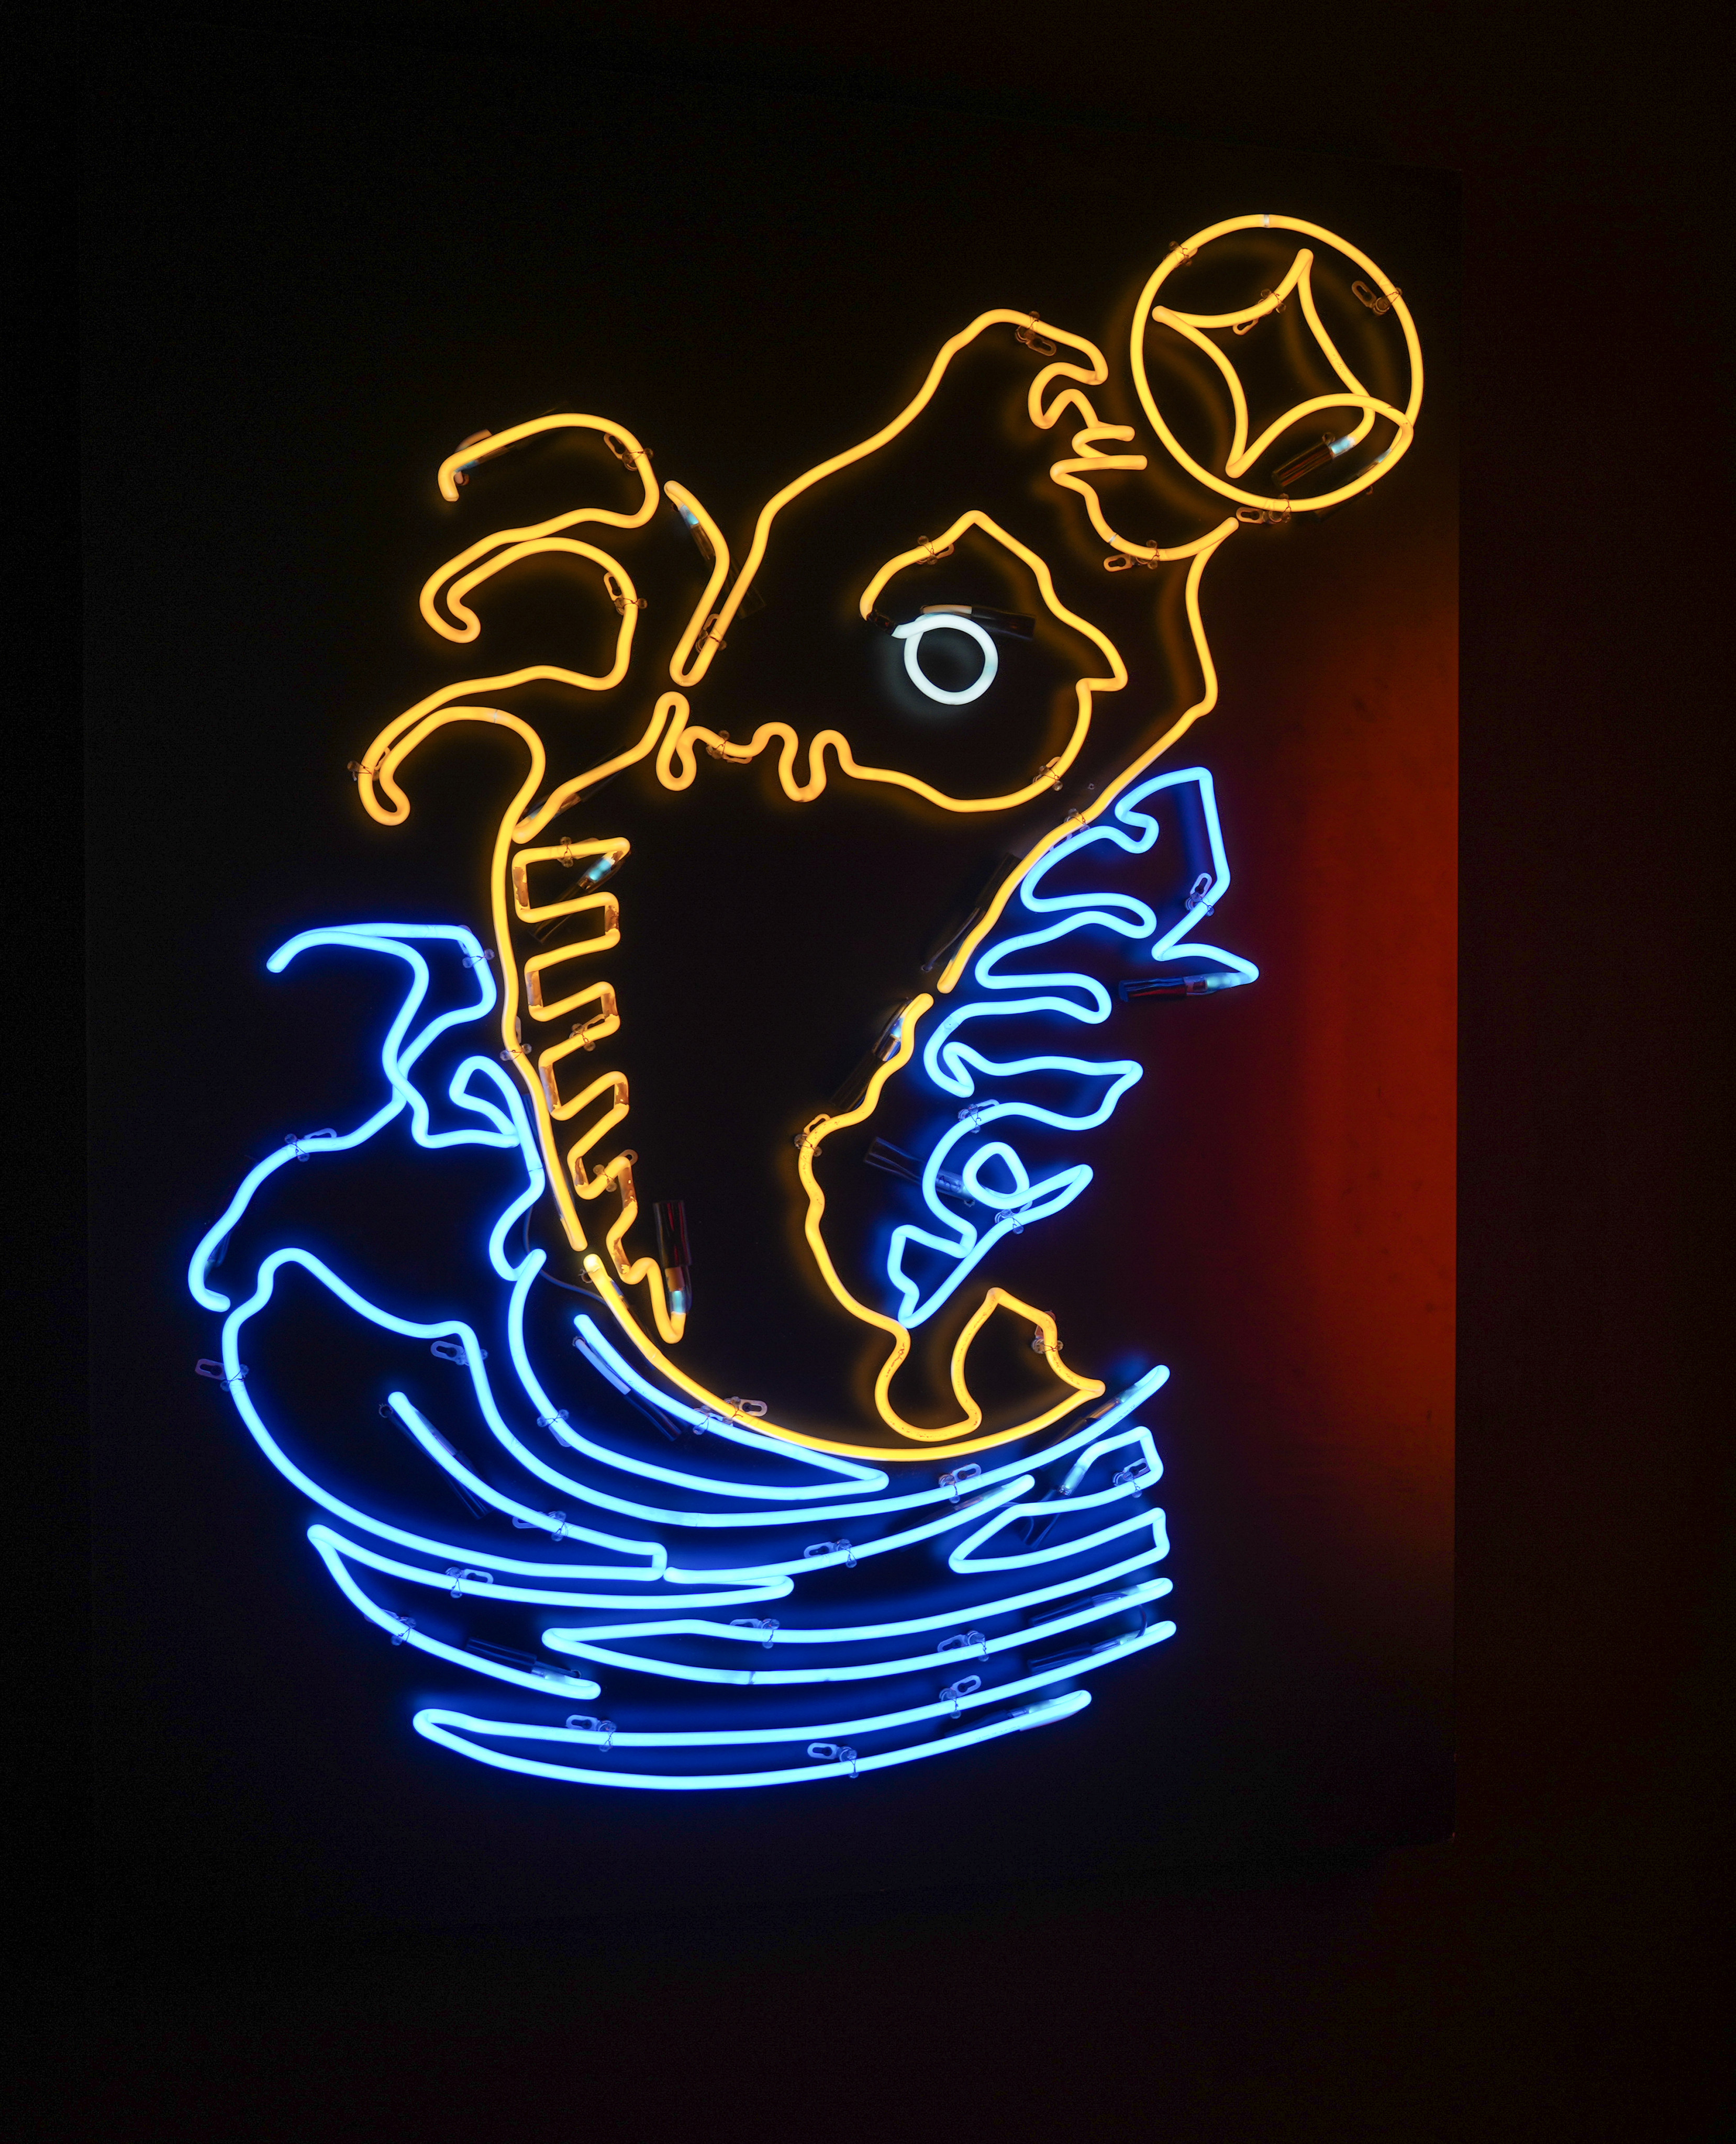 Detail from one of the rescued neon signs on display in the “Vital Signs” exhibition at Tai Kun in Central, Hong Kong. Photo: Sam Tsang